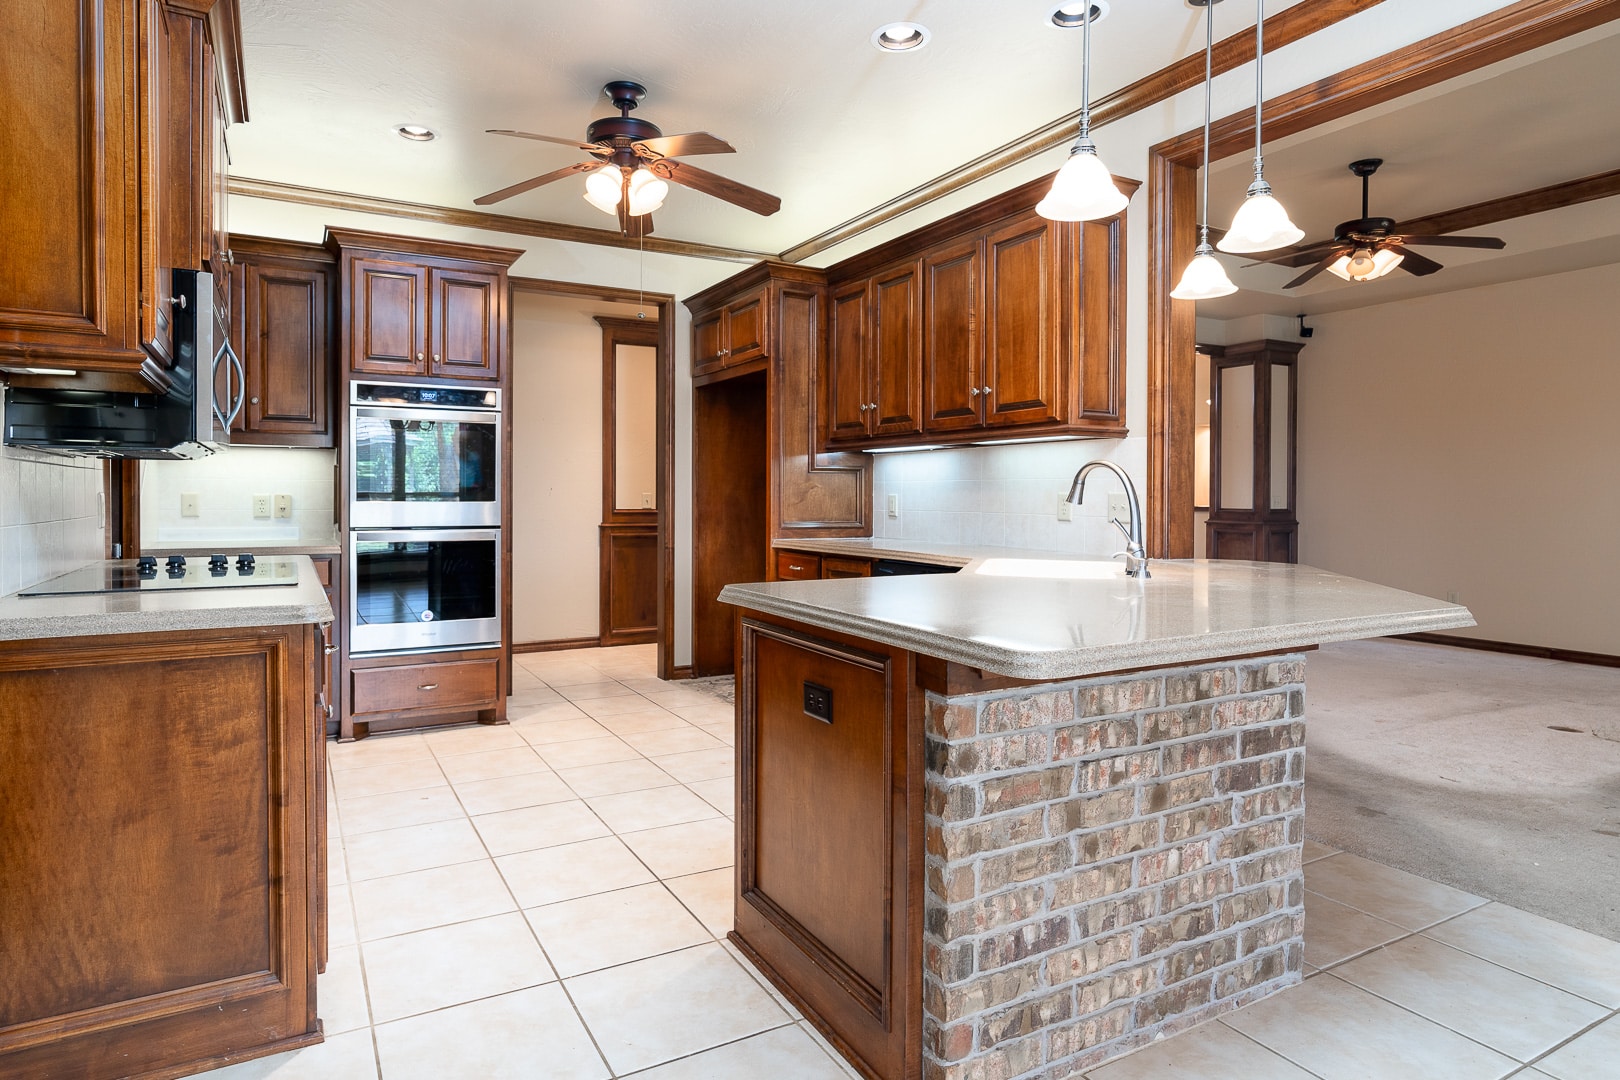 A kitchen with wood cabinets and a ceiling fan.